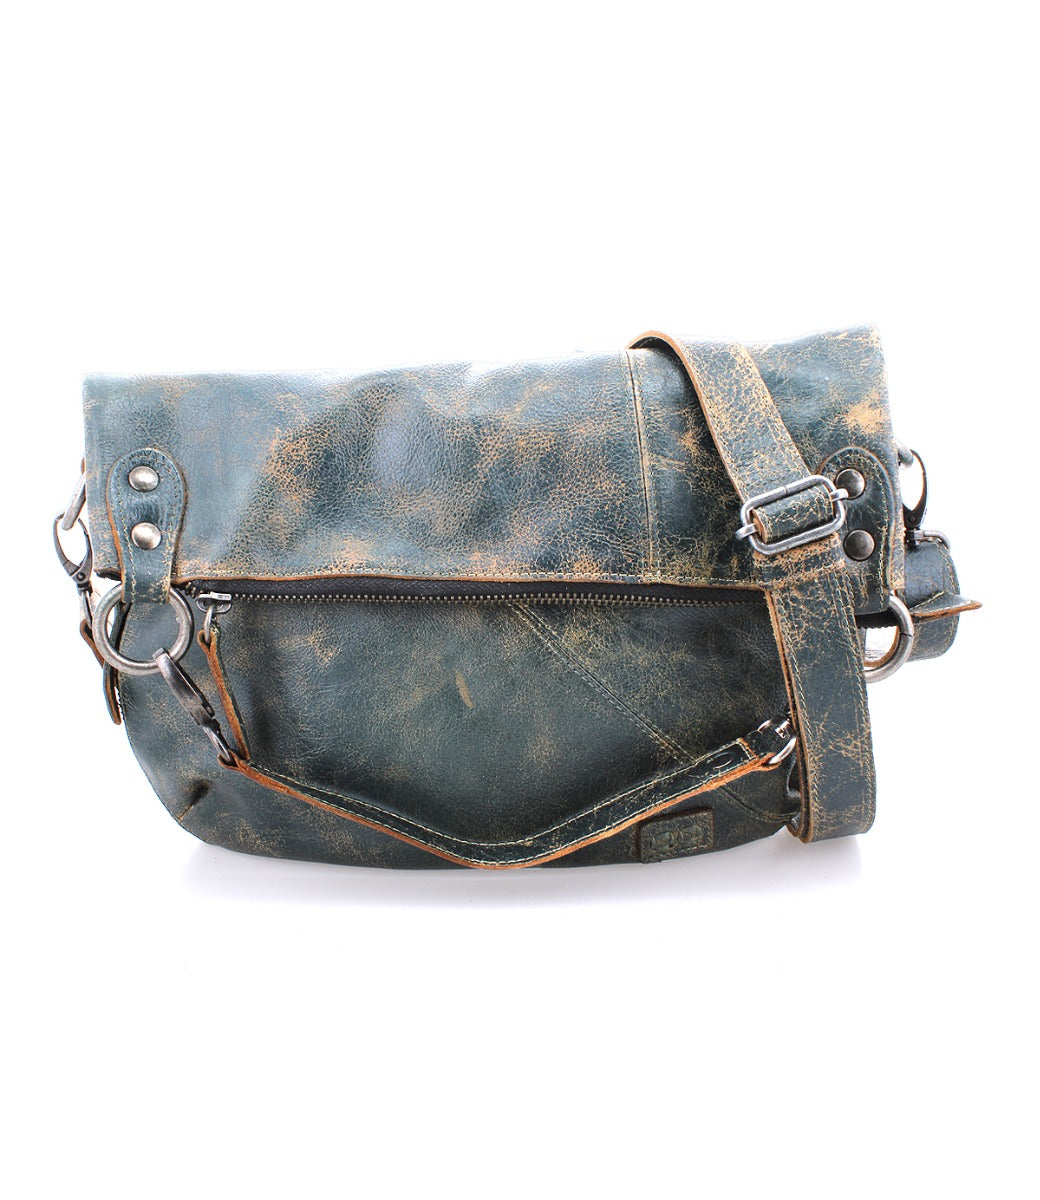 A green leather Tahiti crossbody bag with a strap by Bed Stu.